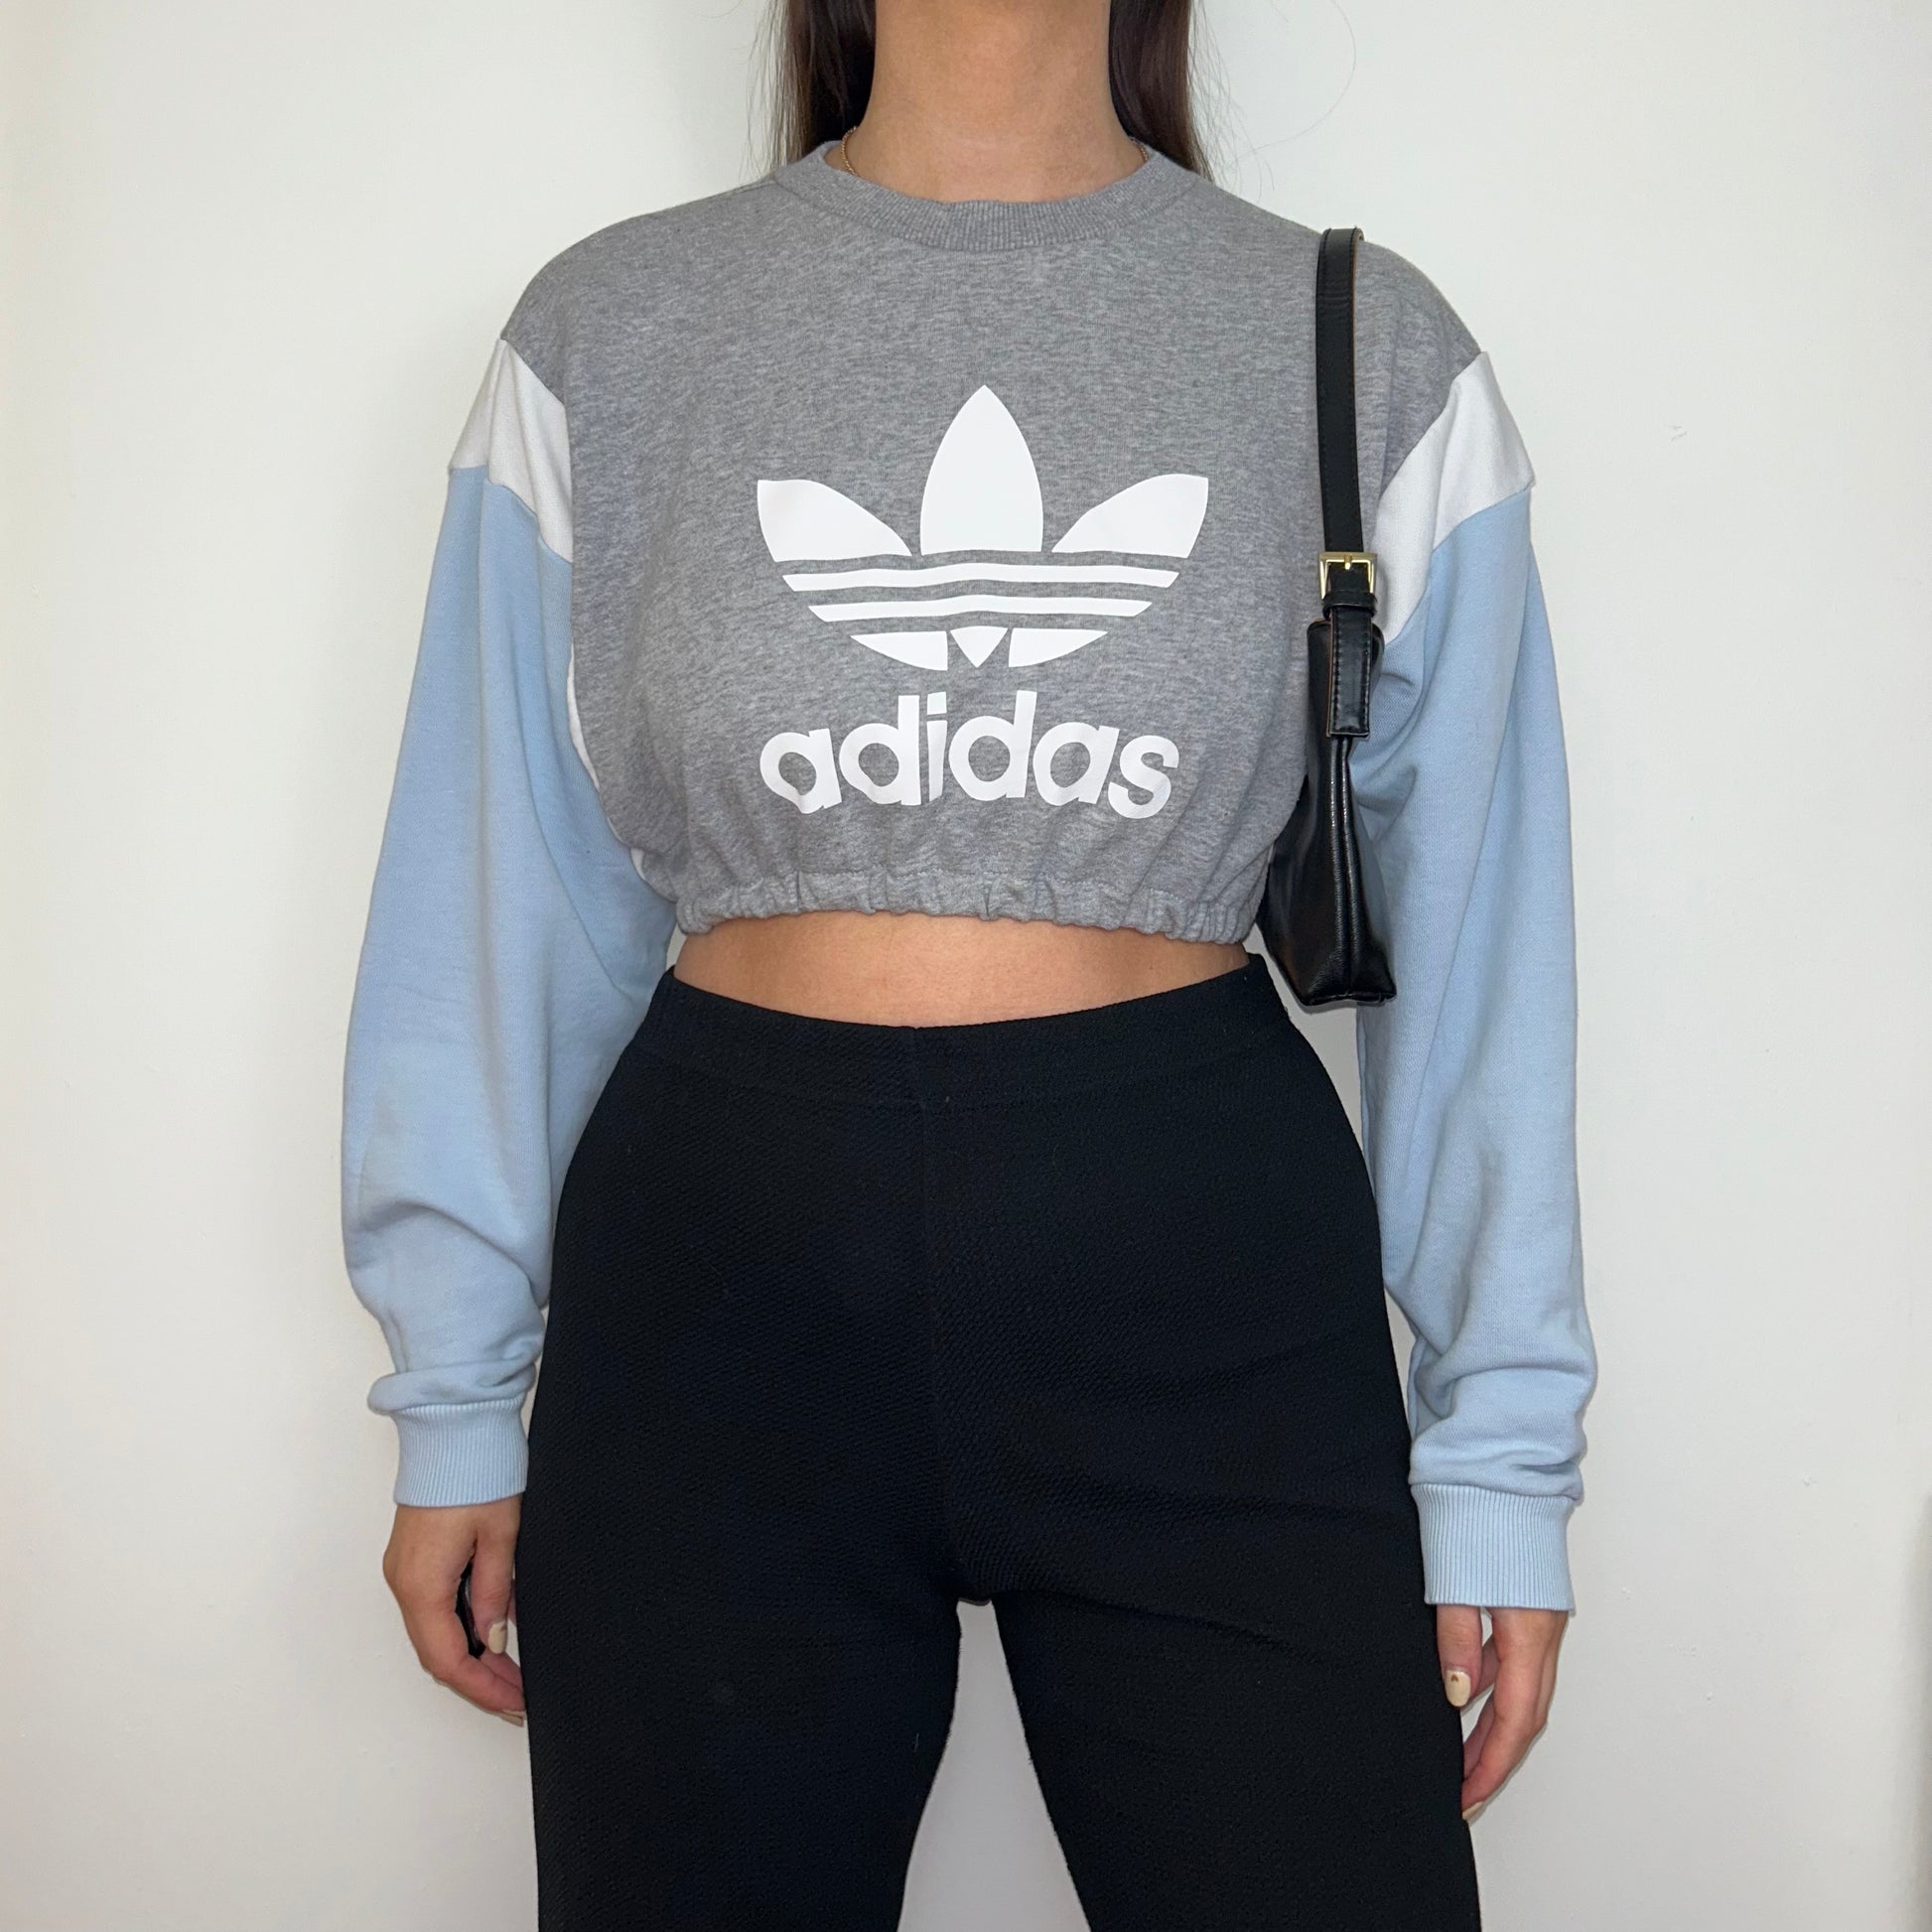 grey and blue cropped sweatshirt with white adidas logo shown on a model wearing black trousers and a black shoulder bag